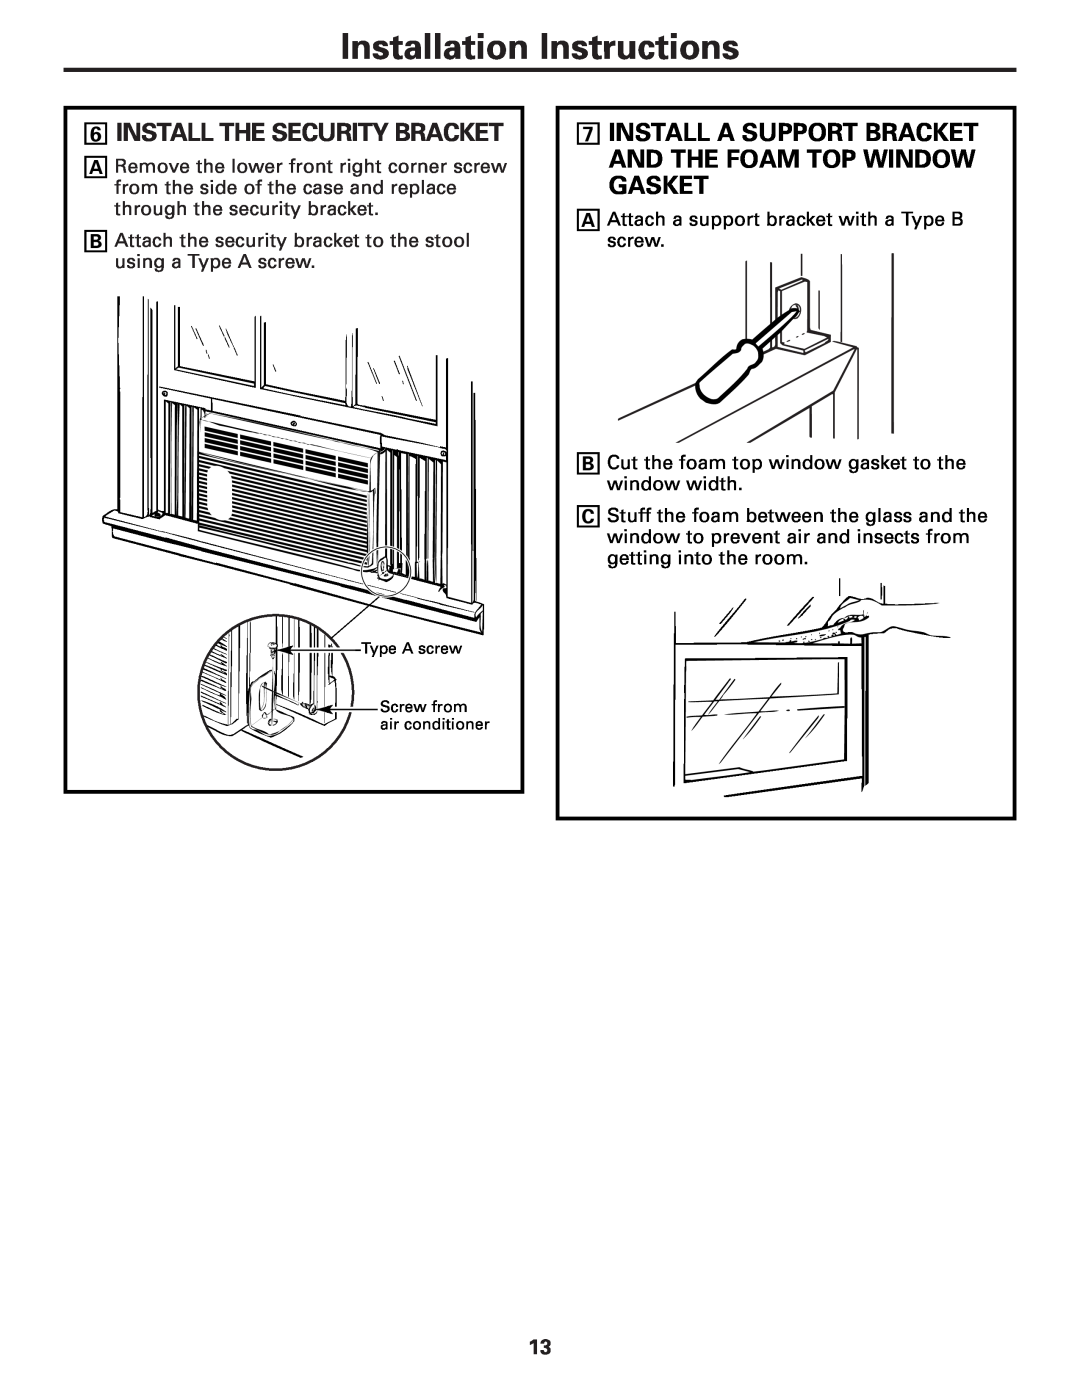 GE AGM05 owner manual 6INSTALL THE SECURITY BRACKET, Installation Instructions 